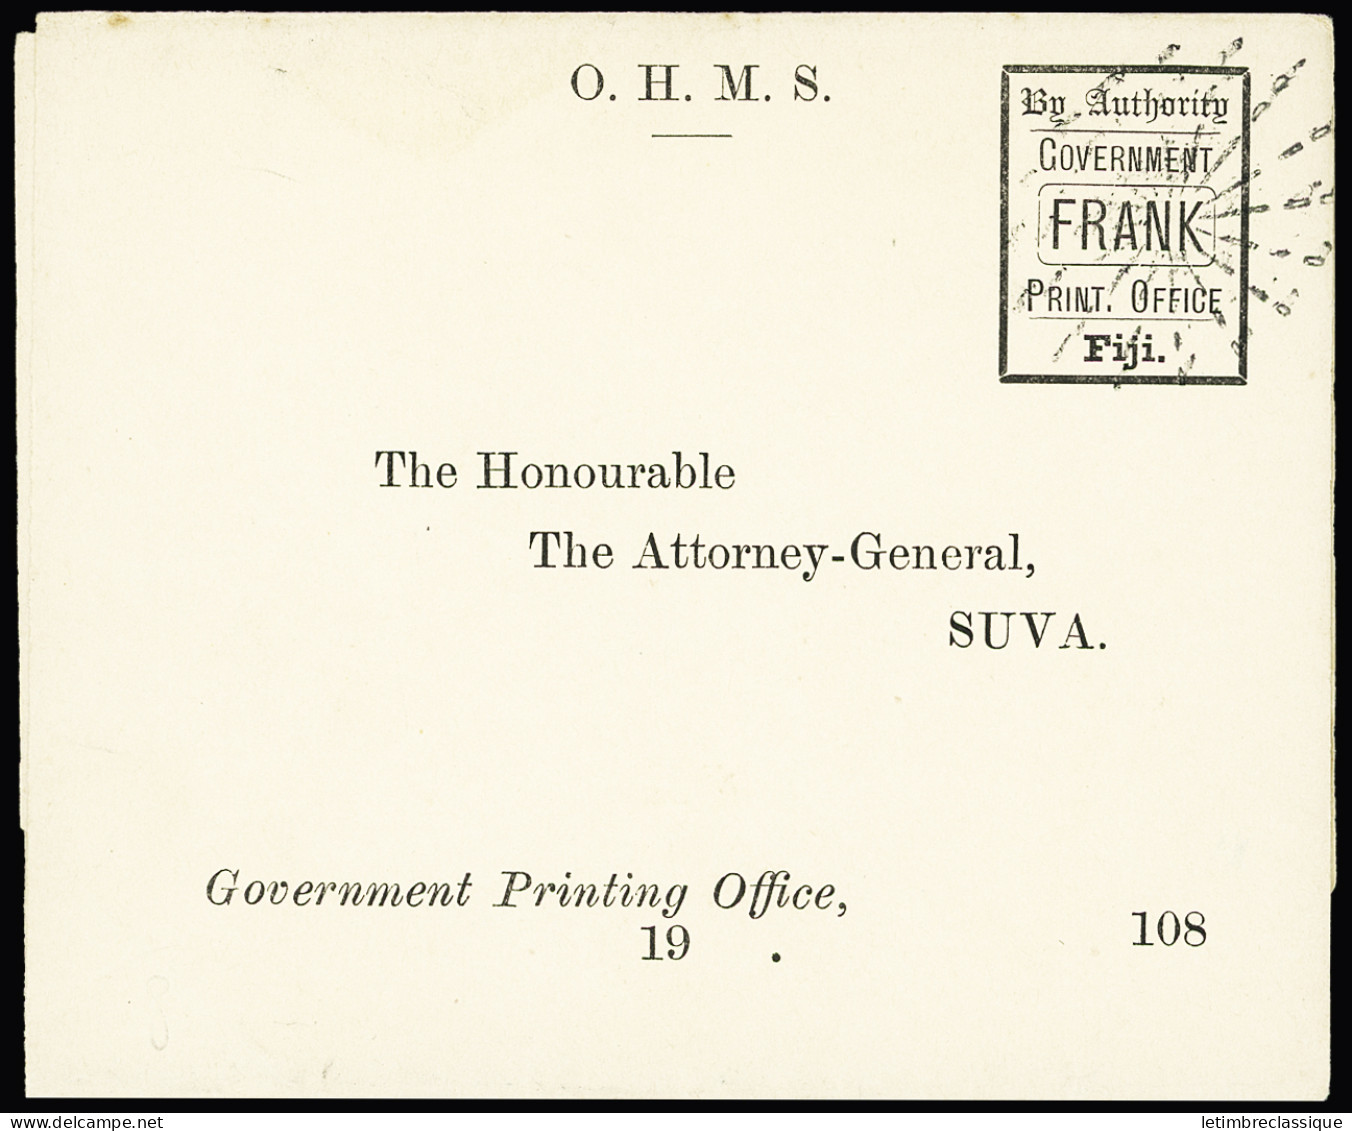 Lettre OHMS Free Frank Postal Stationery Wrapper Used To Attorney-General In Suva, Very Fine, Scarce - Fiji (1970-...)